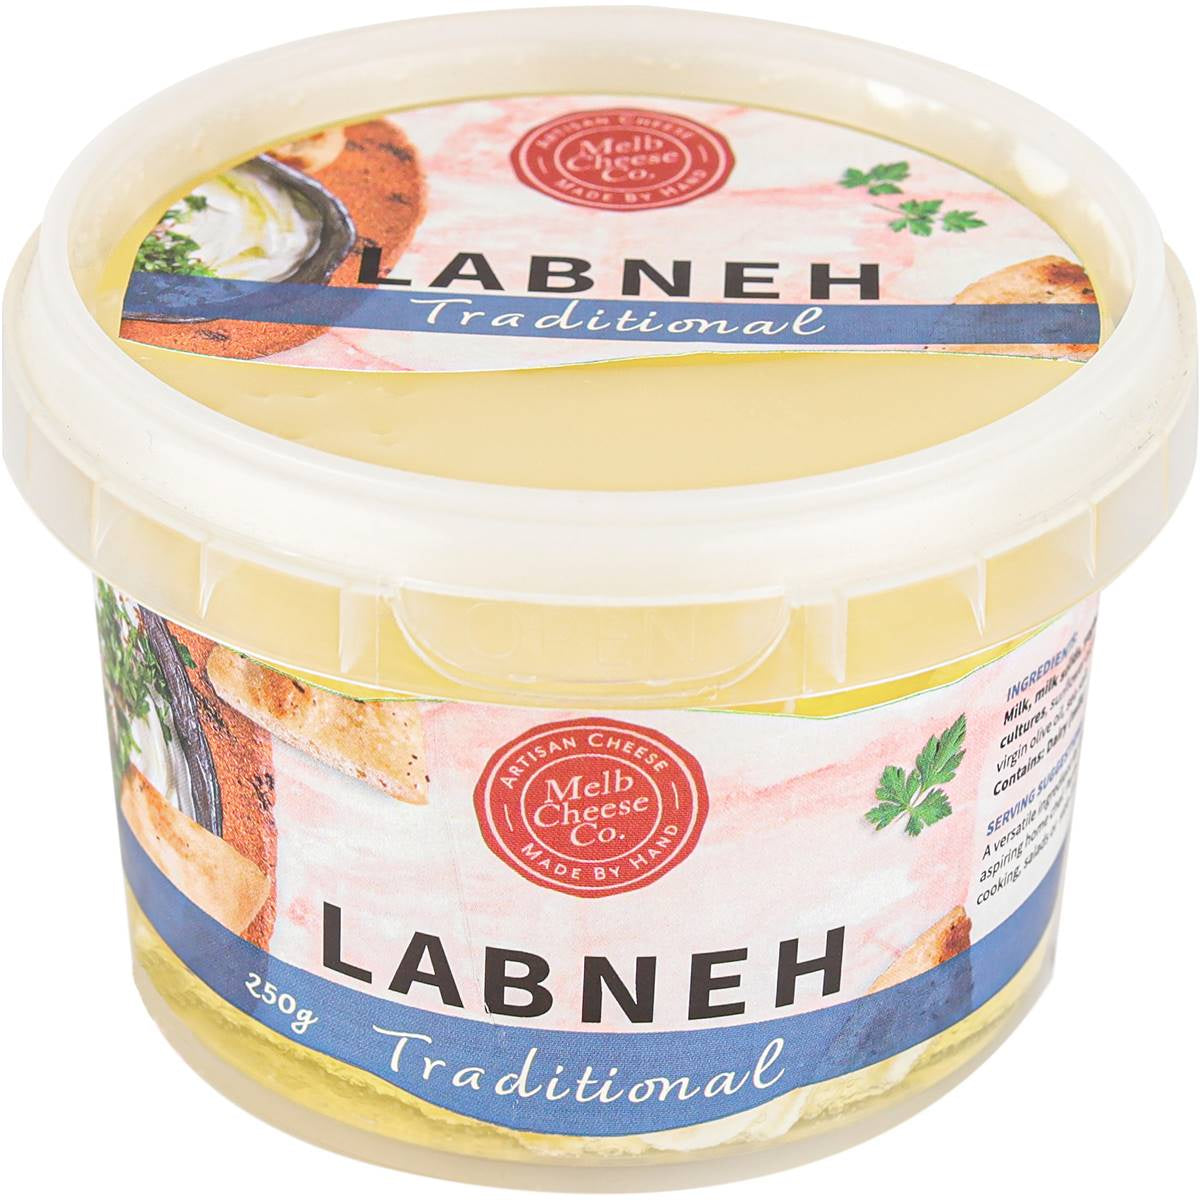 The Melbourne Cheese Company Labneh 250g2